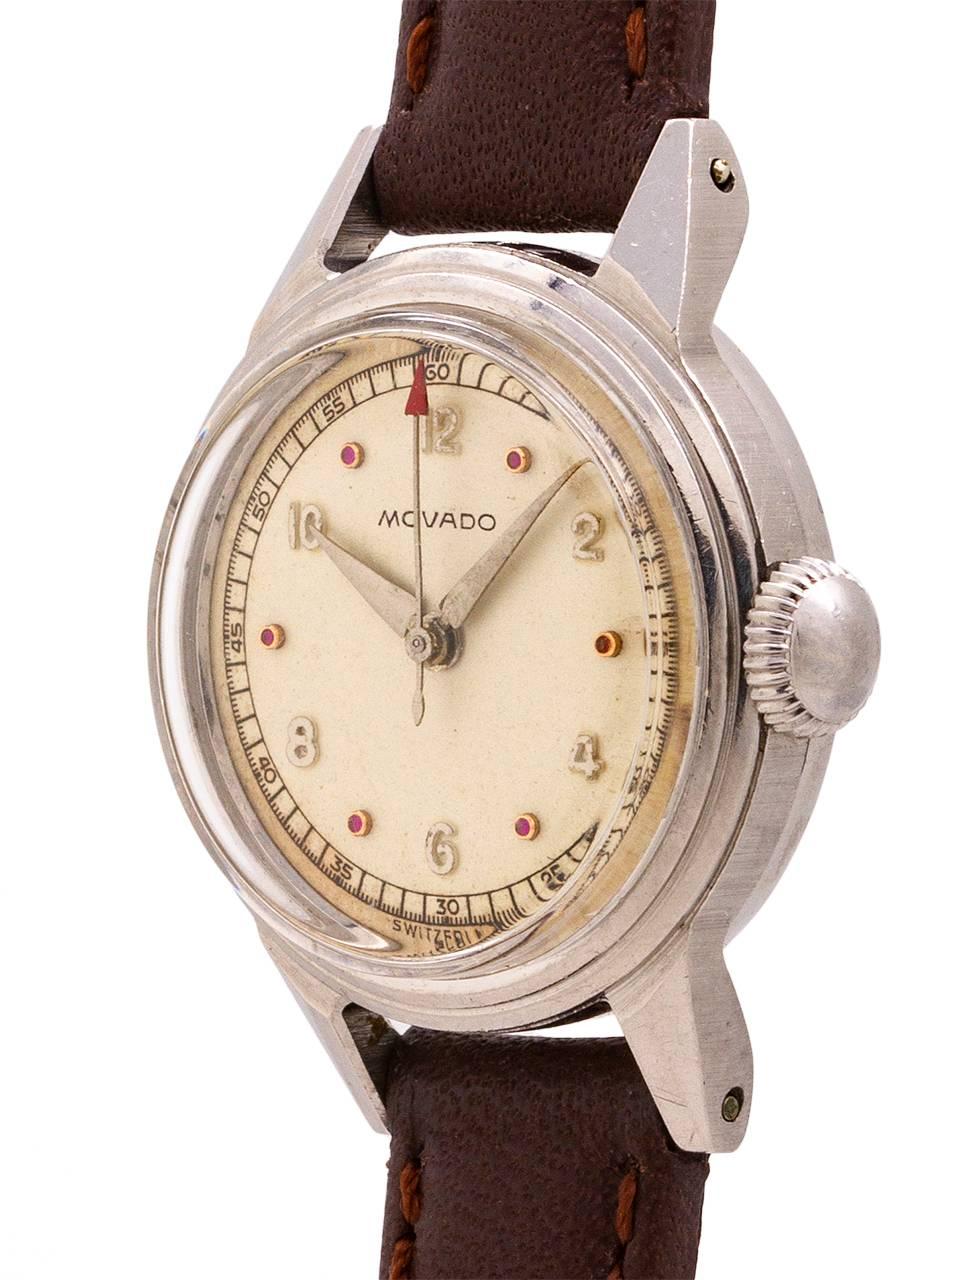 
Vintage lady Movado 22 X 29mm case in stainless steel stepped design case with screw down caseback and original mushroom style crown, circa 1940’s. Featuring acrylic crystal, and beautiful condition original silvered satin dial with ruby indexes